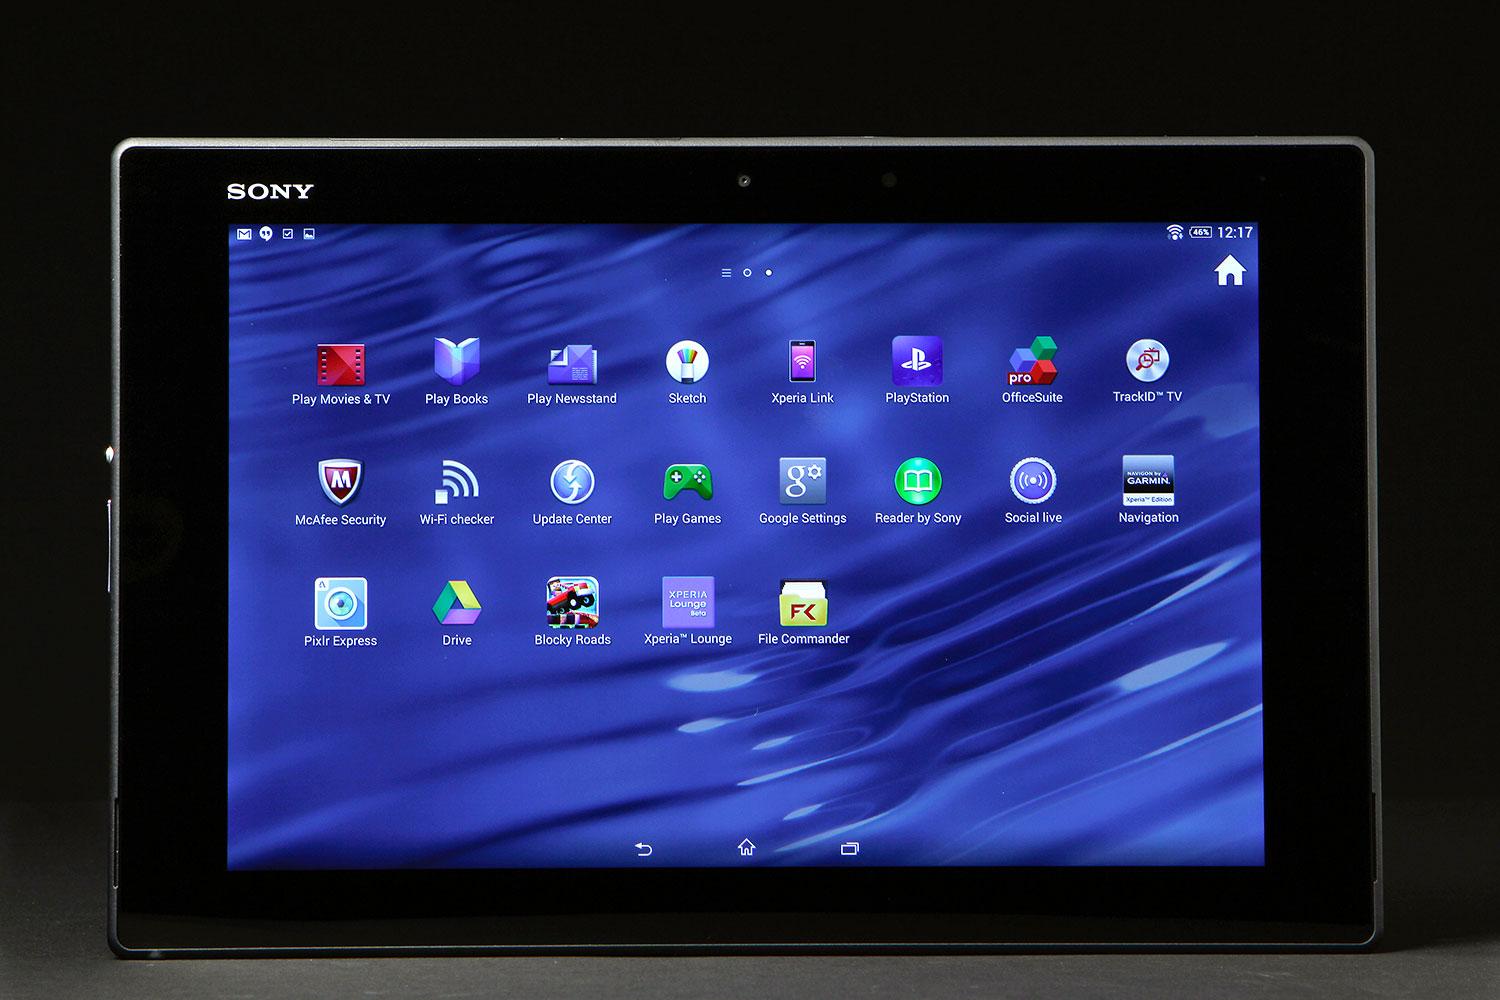 Xperia Z2 Tablet Review: The Best 10.1-inch Android Tablet